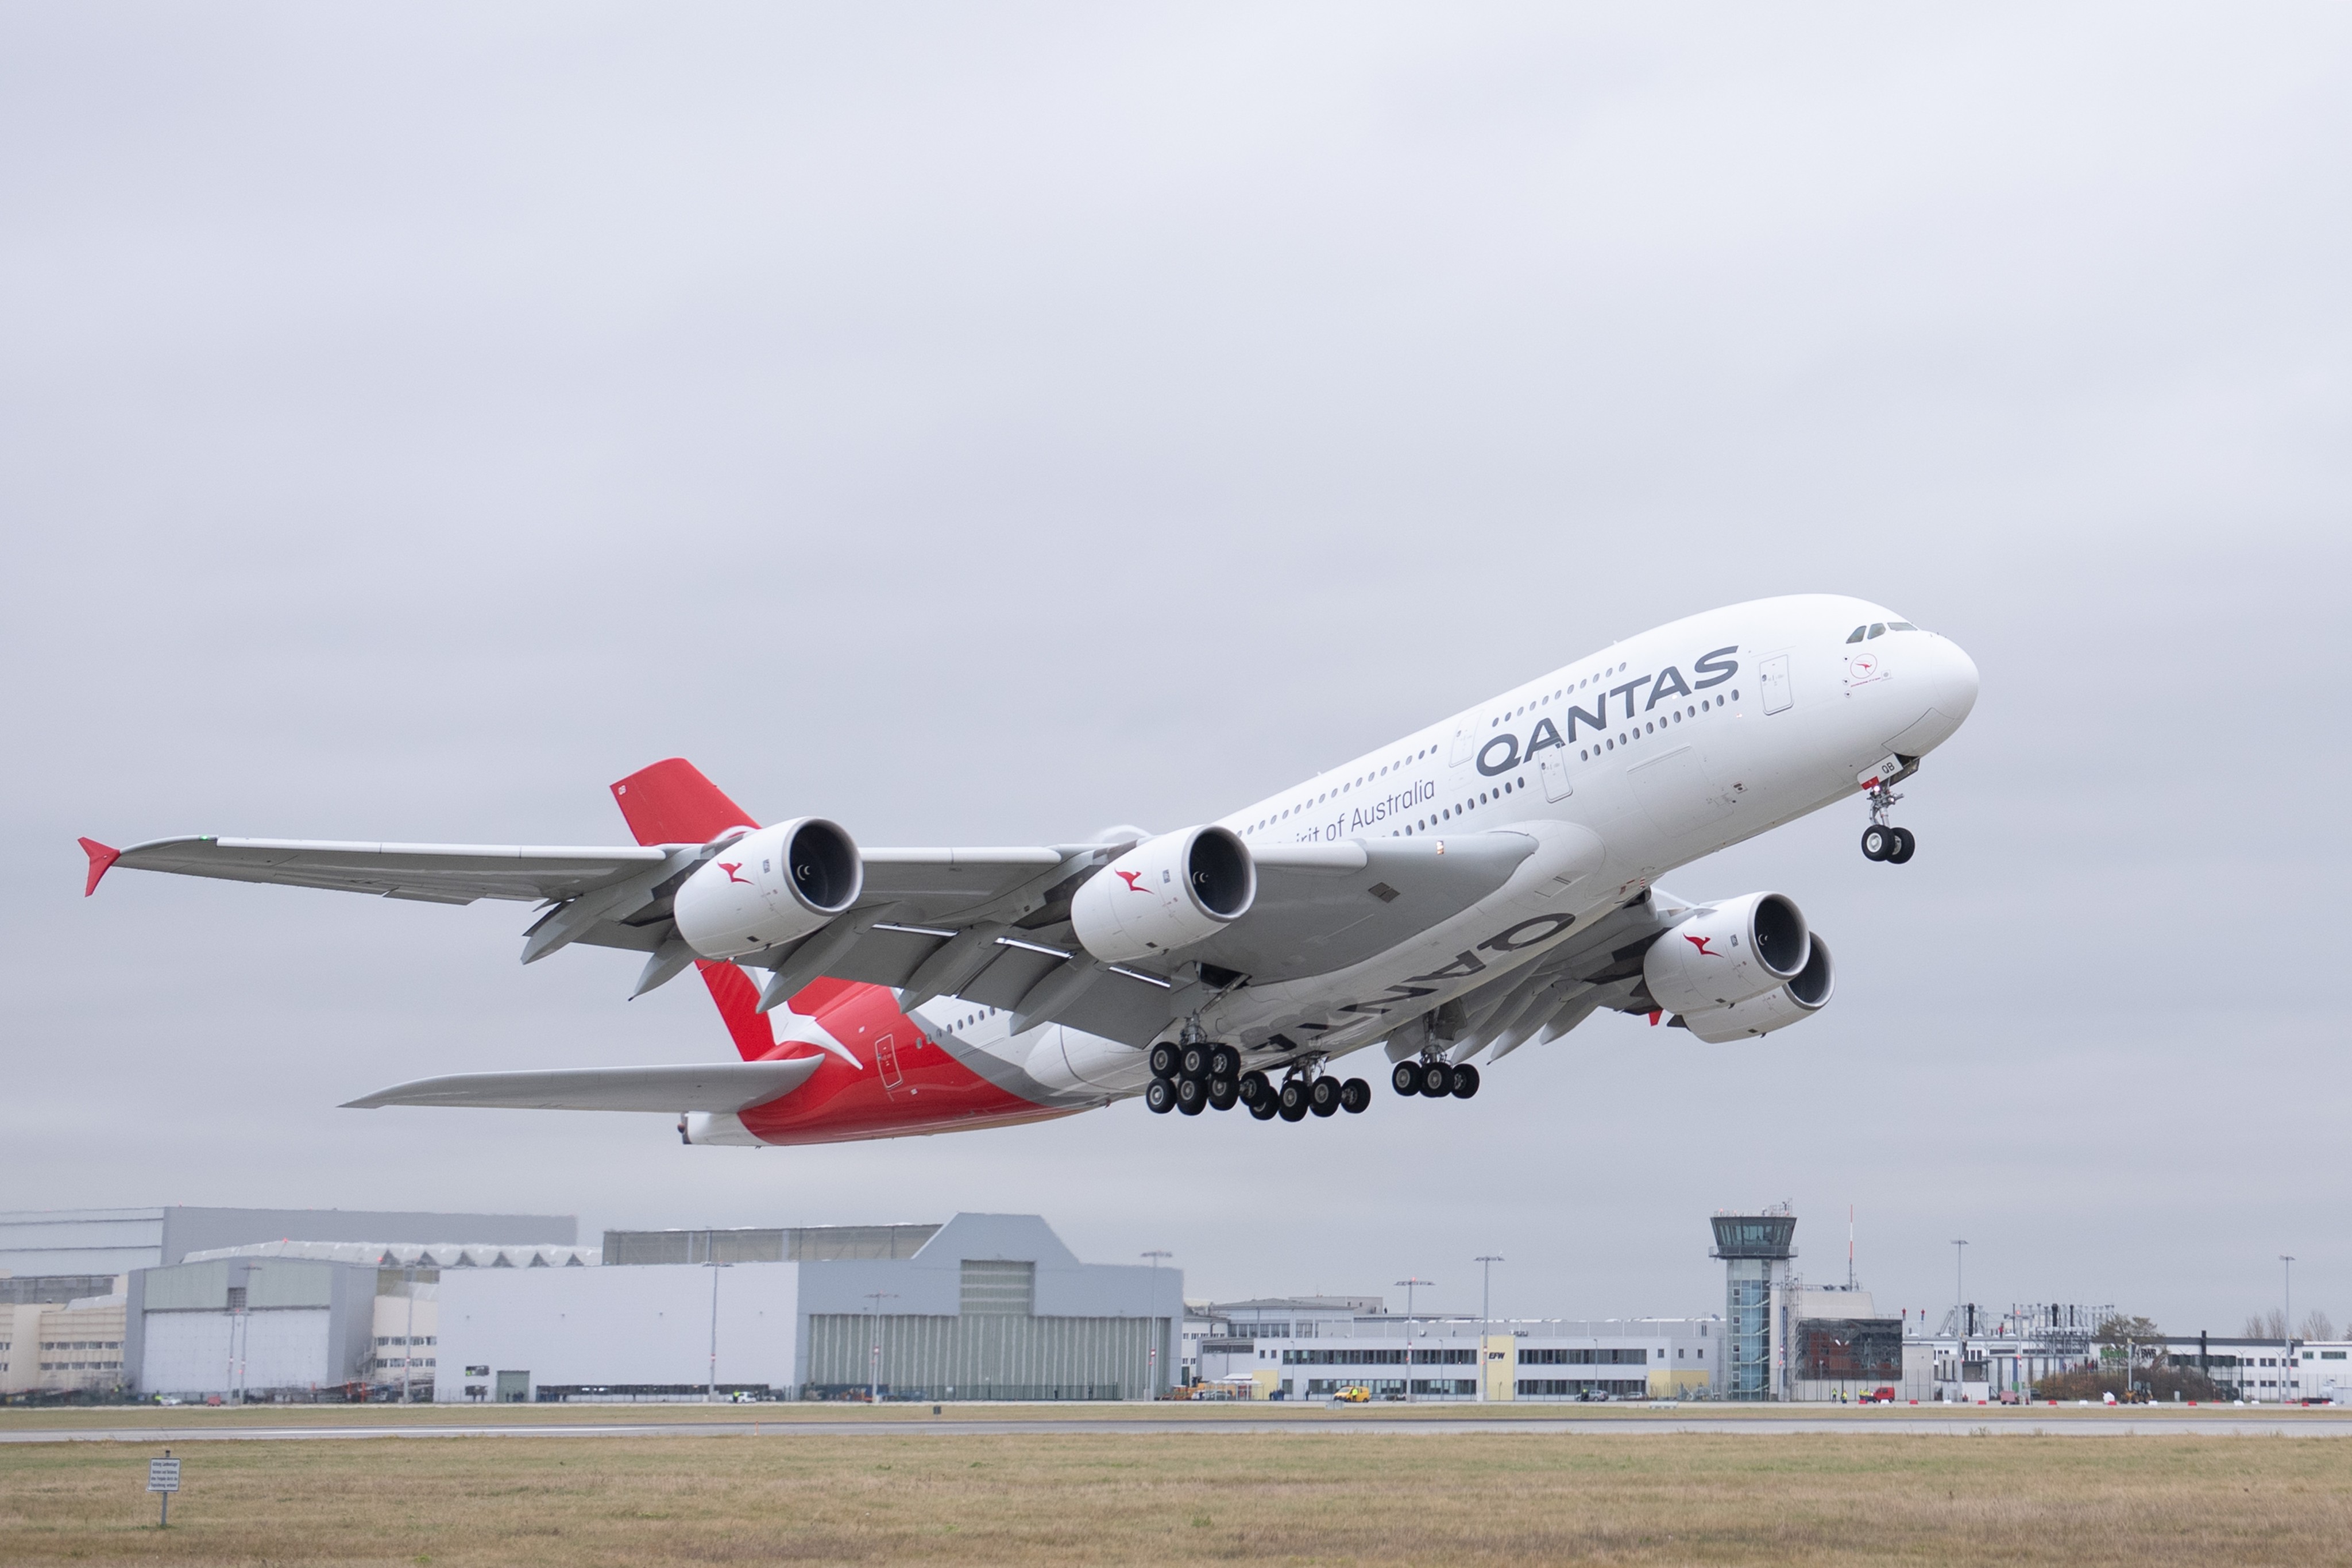 Qantas said flat shoes can now be worn with all uniforms, as can diamond earrings. Anyone can wear makeup if they choose to, and have hair in a ponytail or bun. Photo: dpa